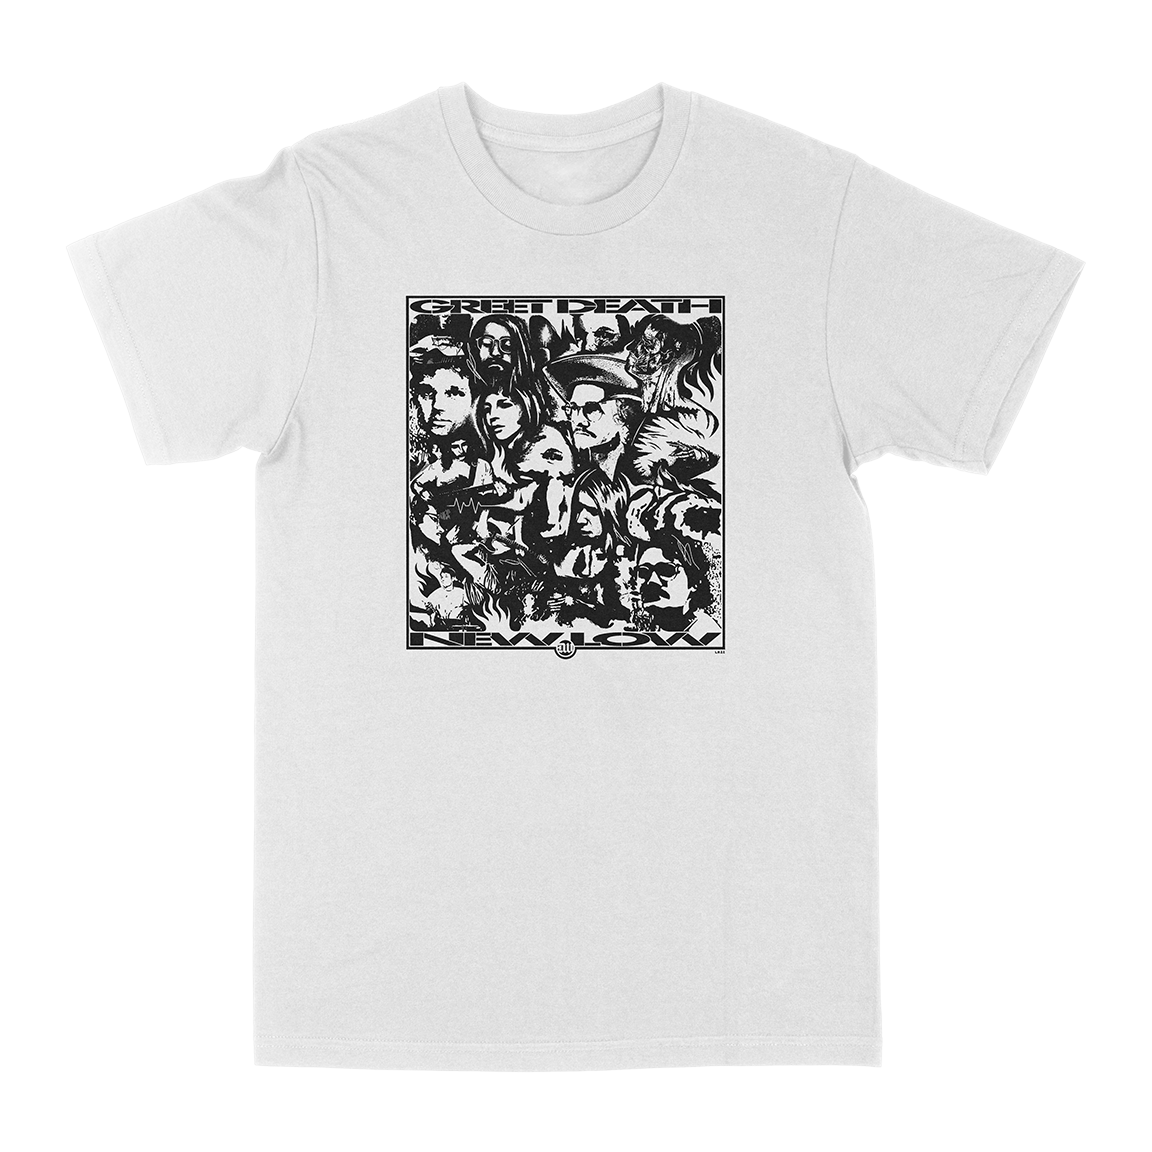 "New Low" White T-Shirt